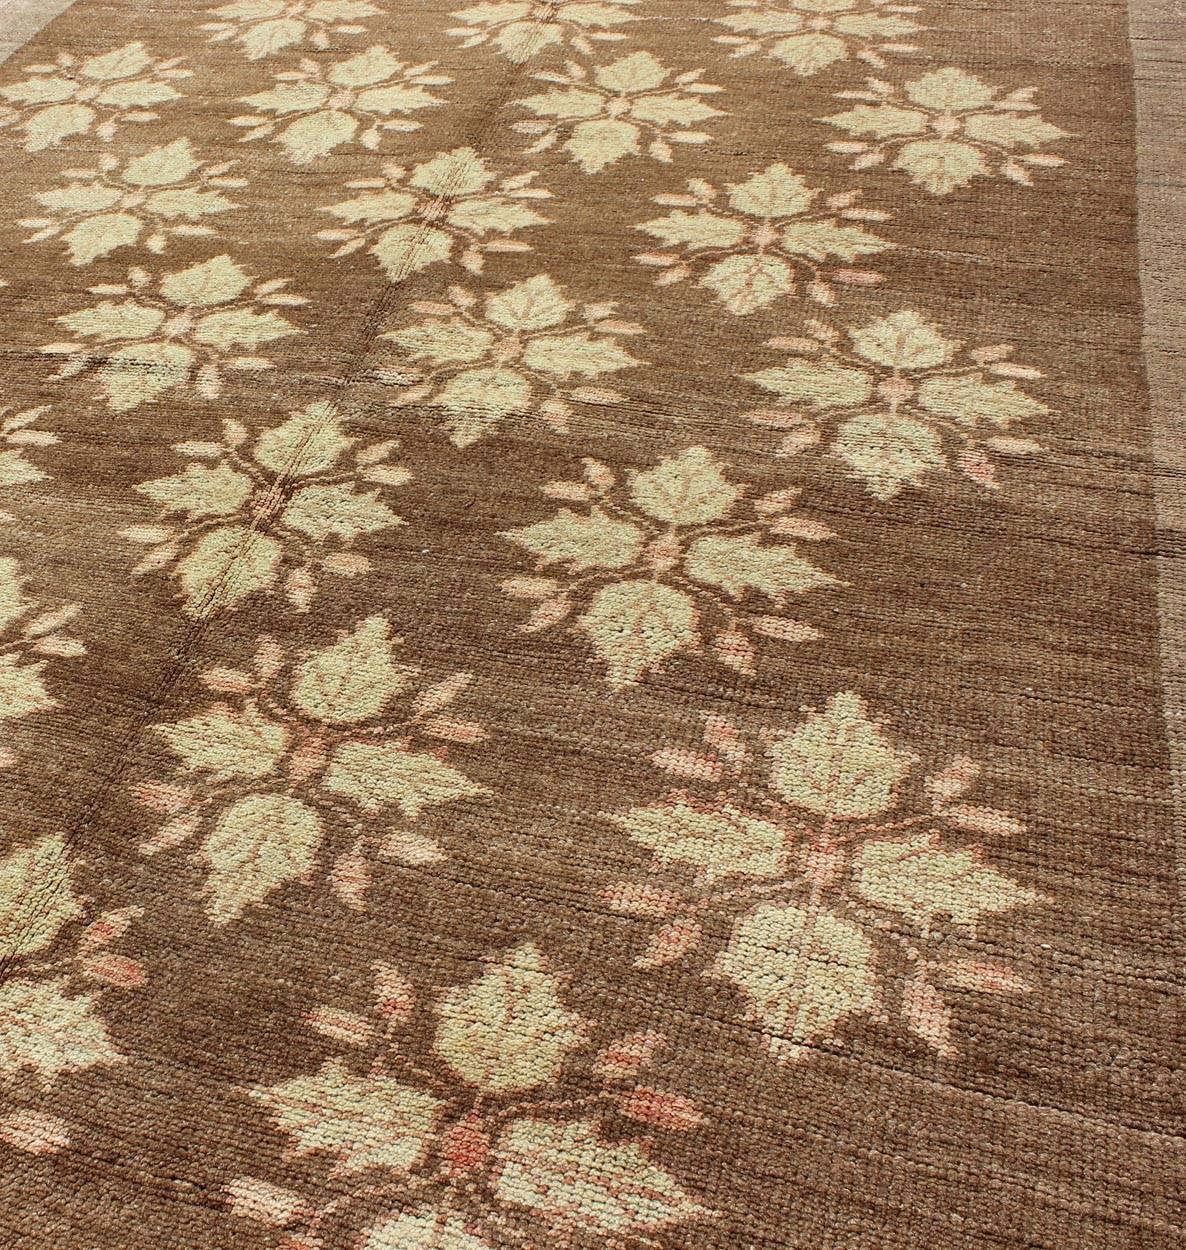 Mid-20th Century Midcentury Turkish Tulu Rug with Mini Blossom Medallions in Brown and Ivory